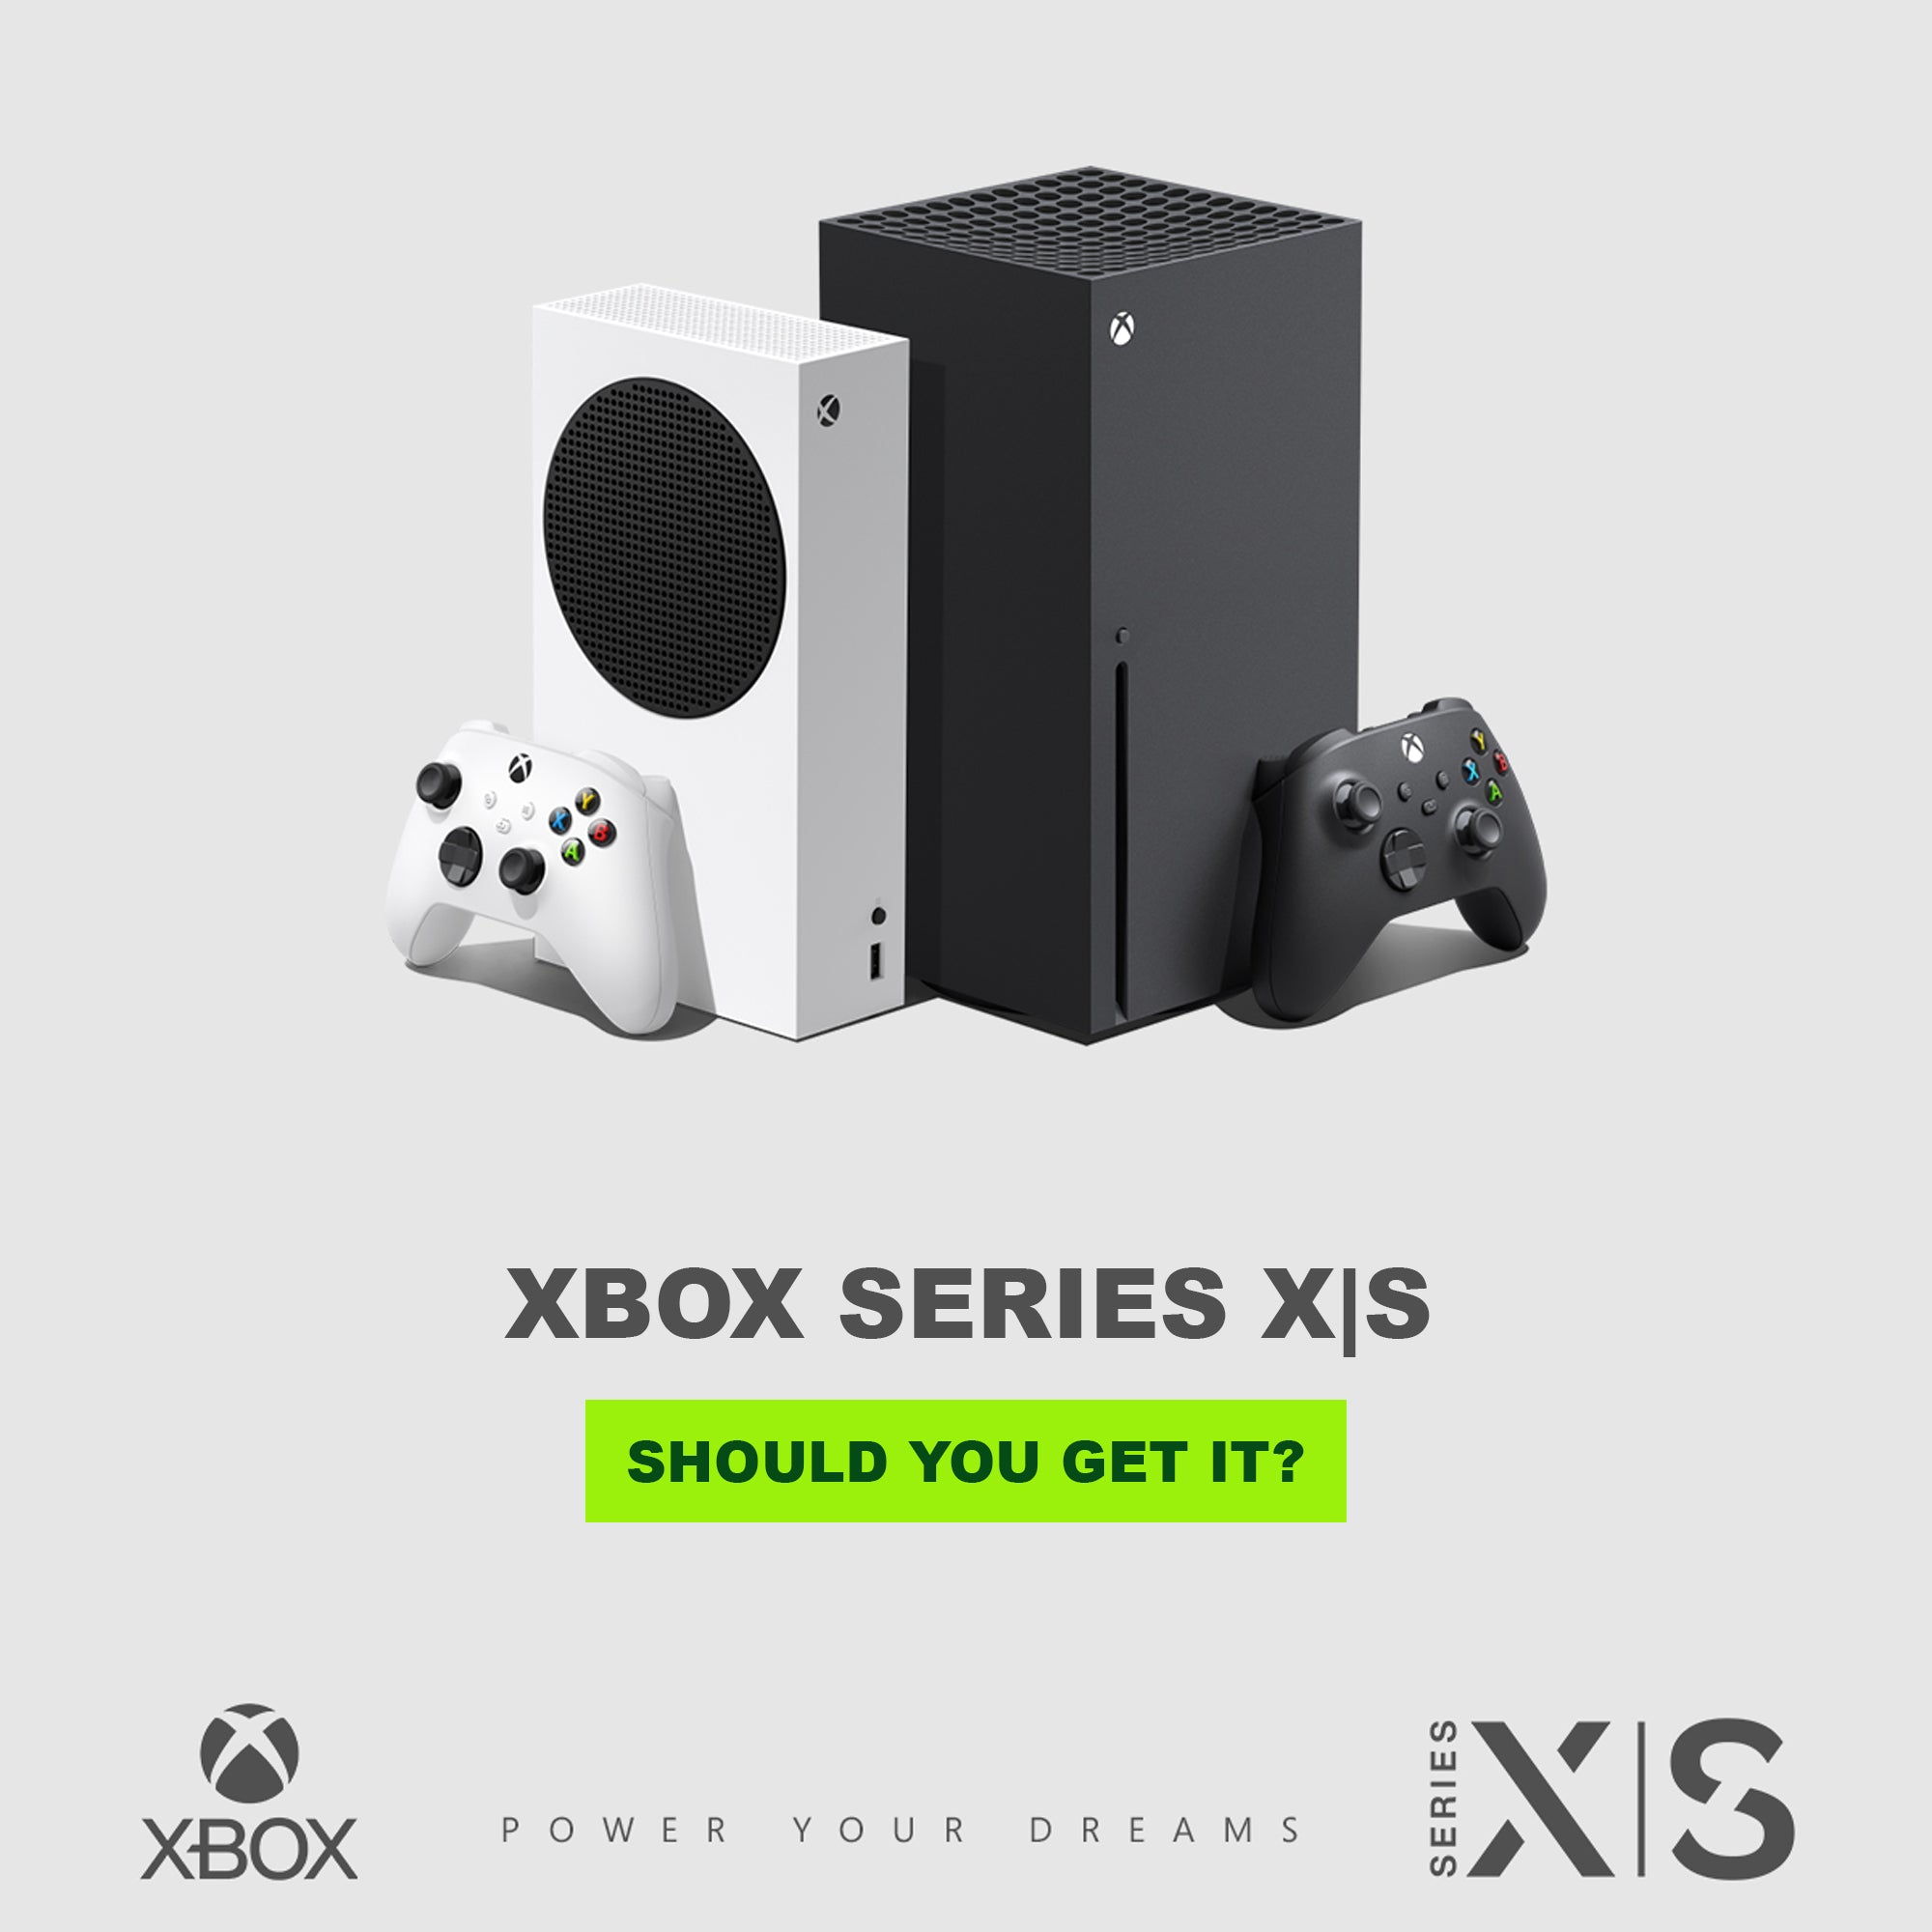 Xbox Series X|S - Should you get it?